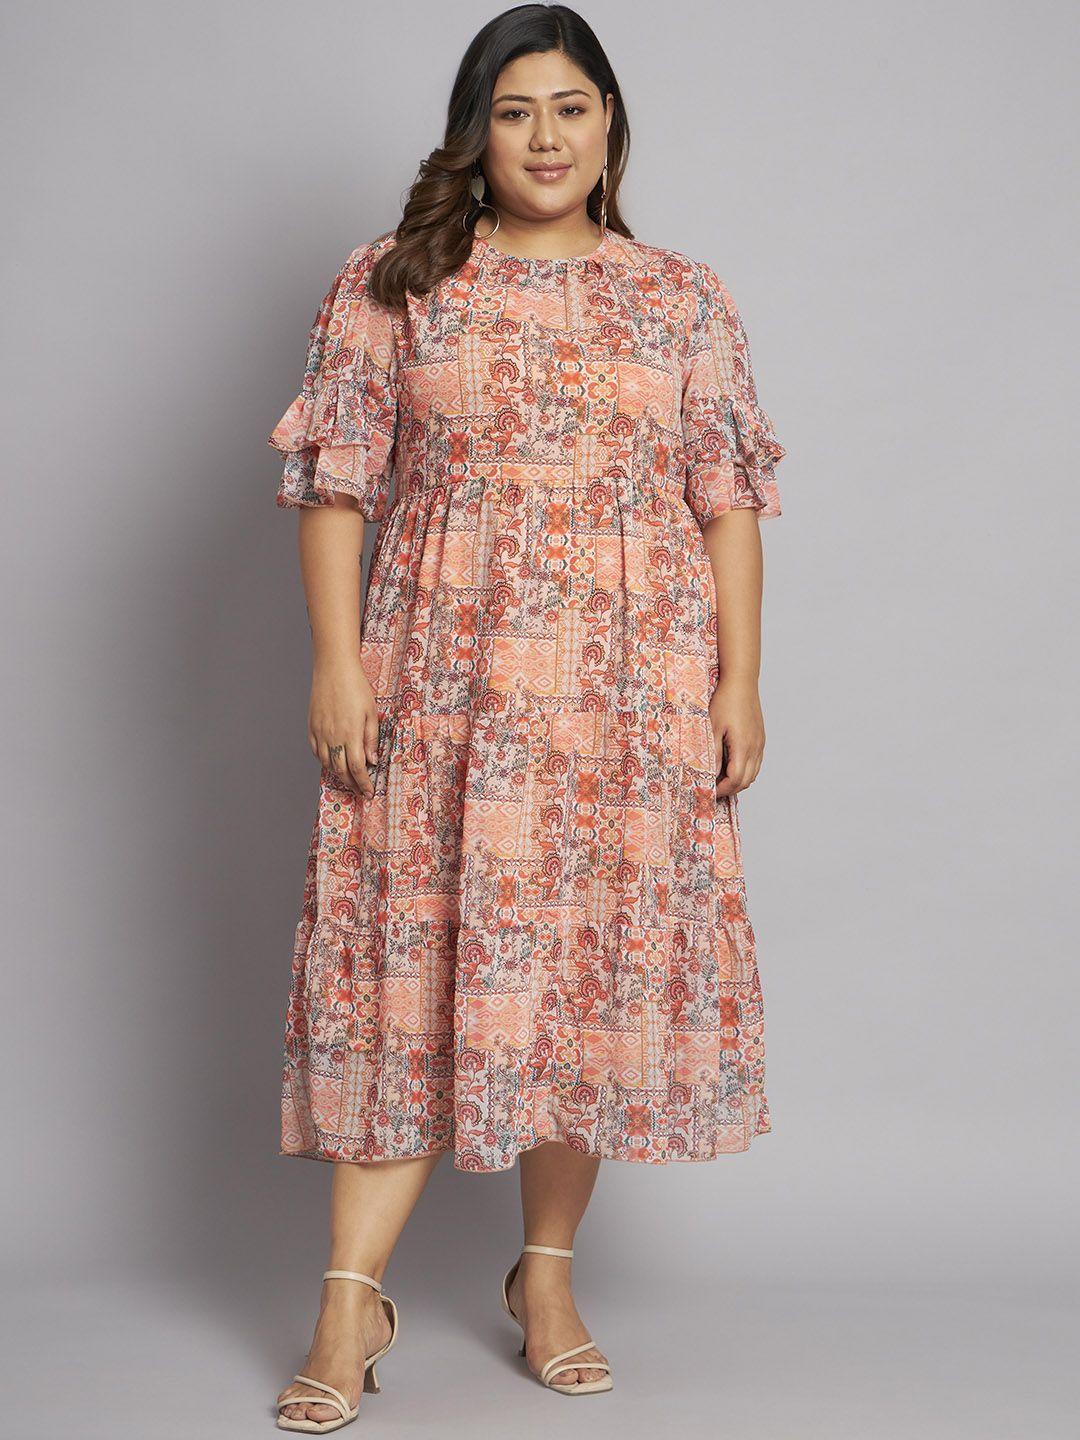 beyound size - the dry state plus size ethnic motifs printed fit & flare midi dress